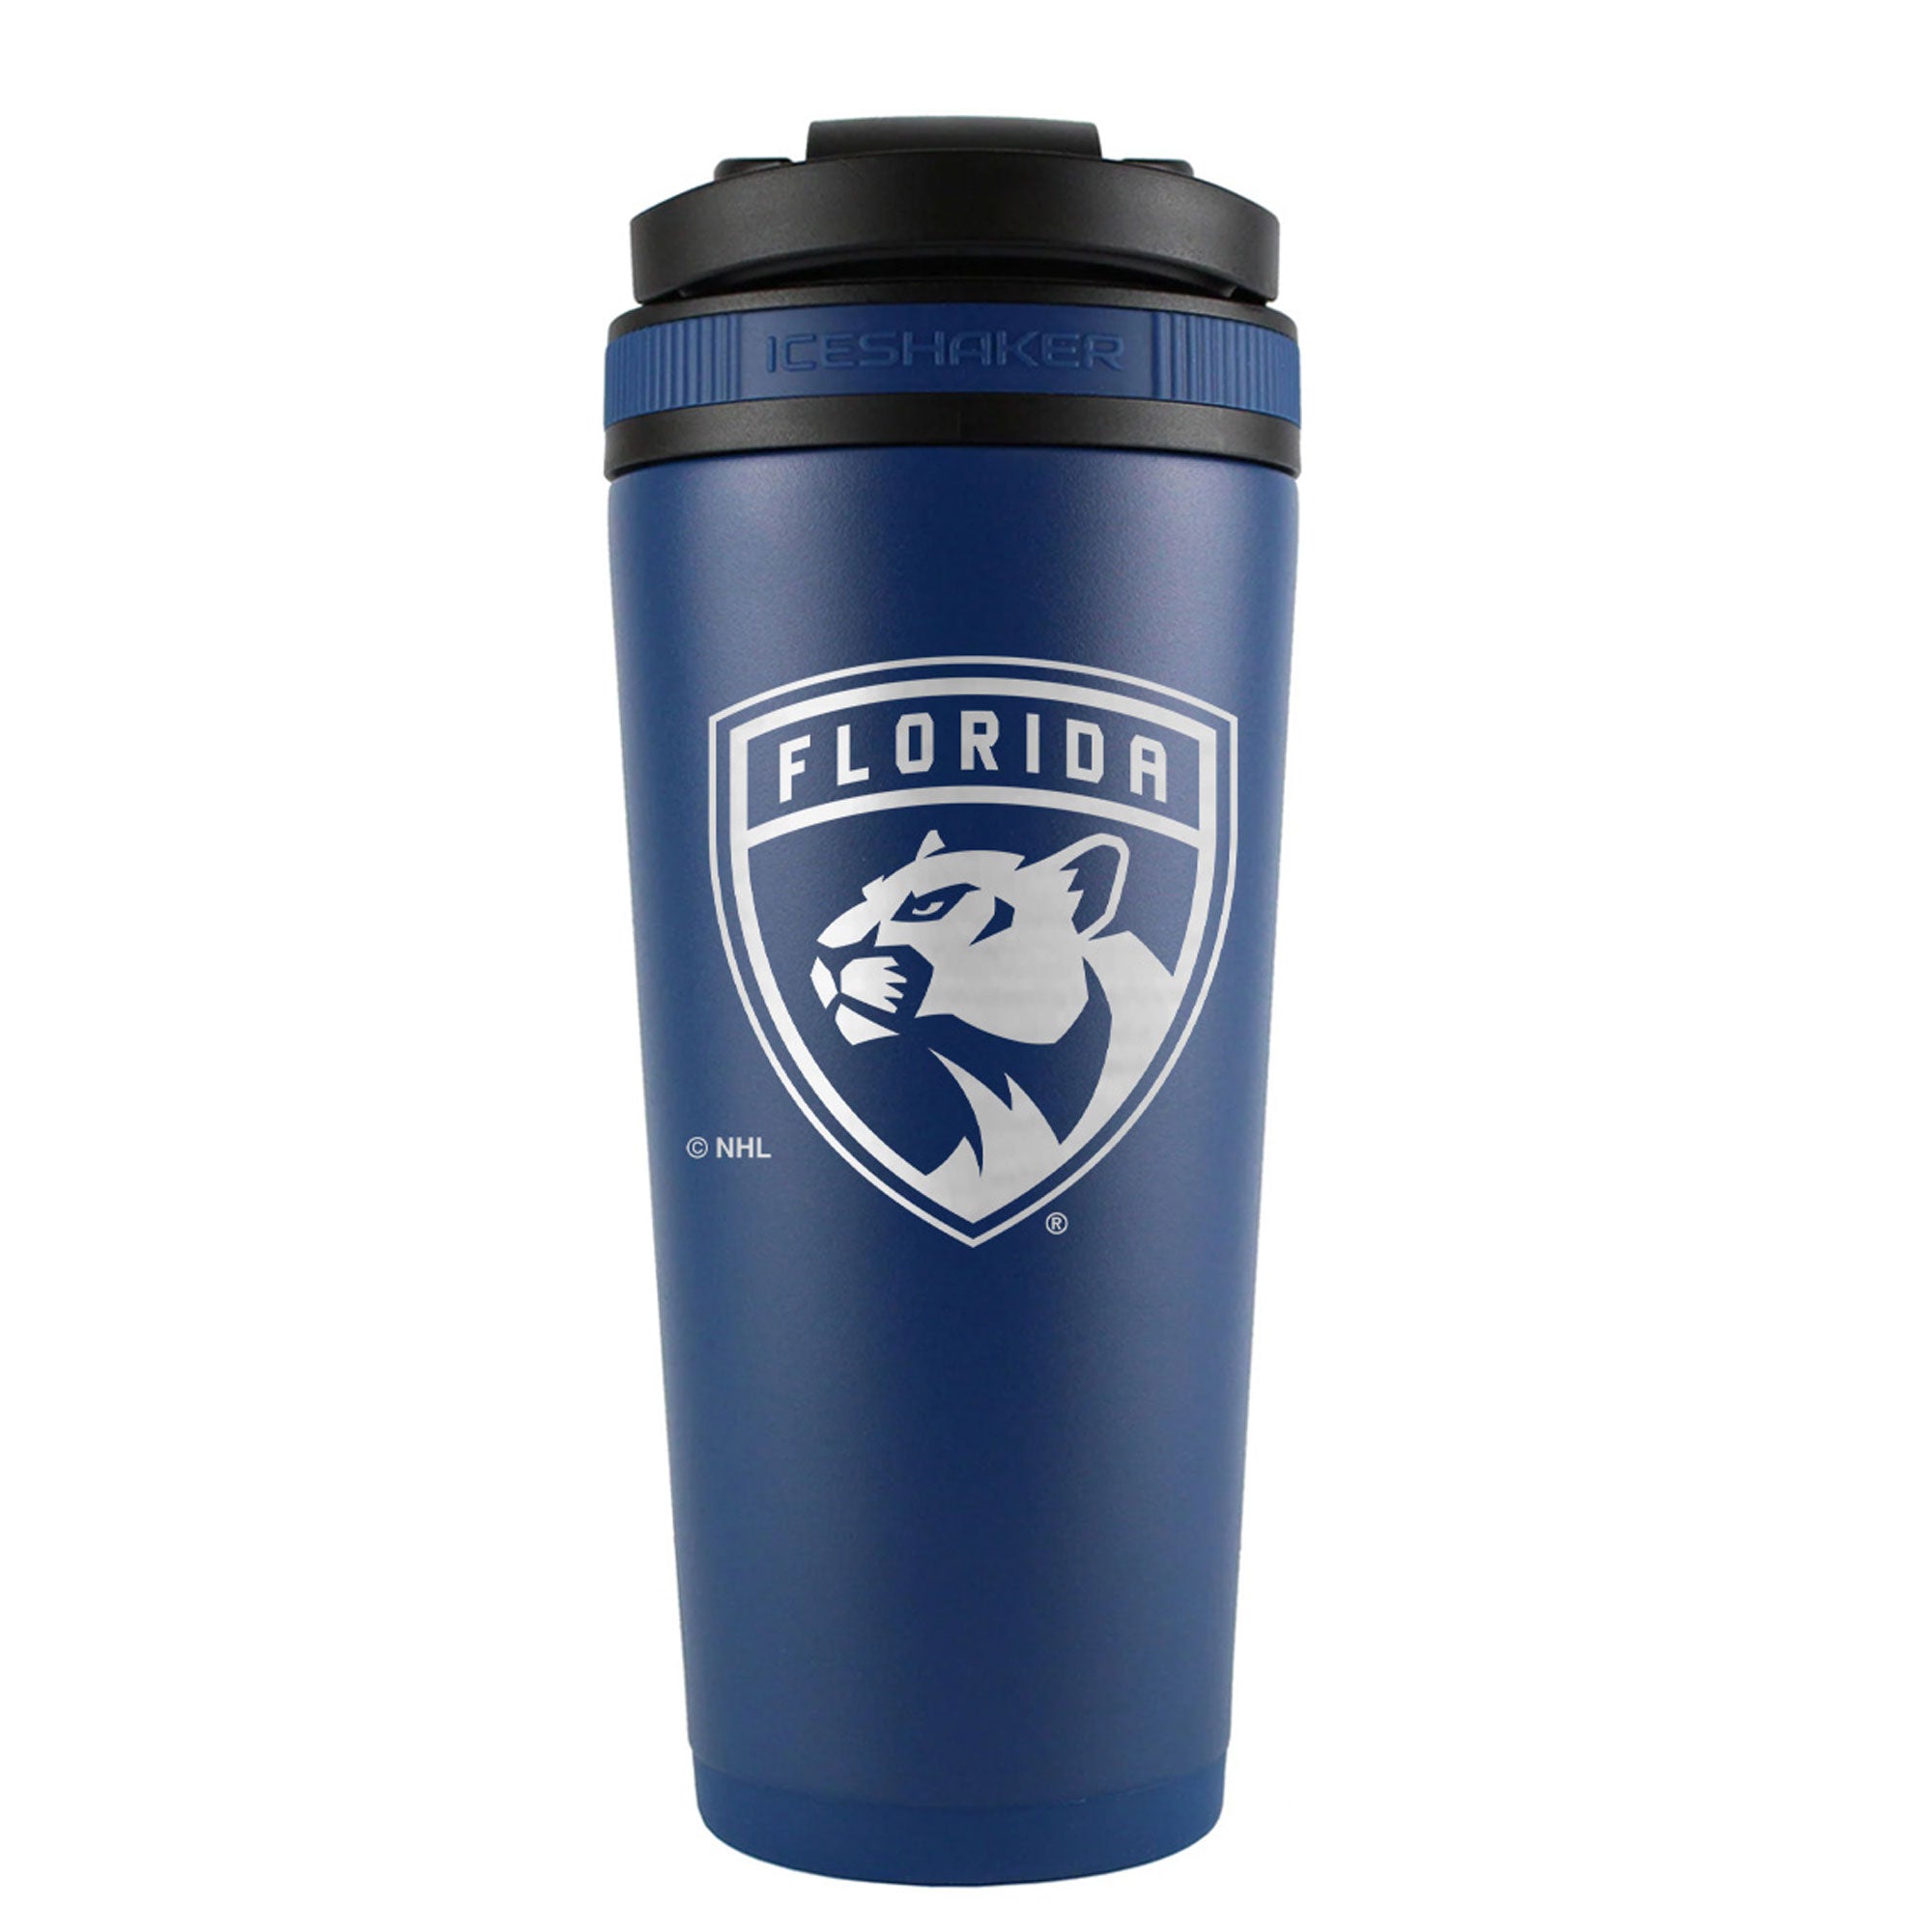 Officially Licensed Florida Panthers 26oz Ice Shaker - Navy